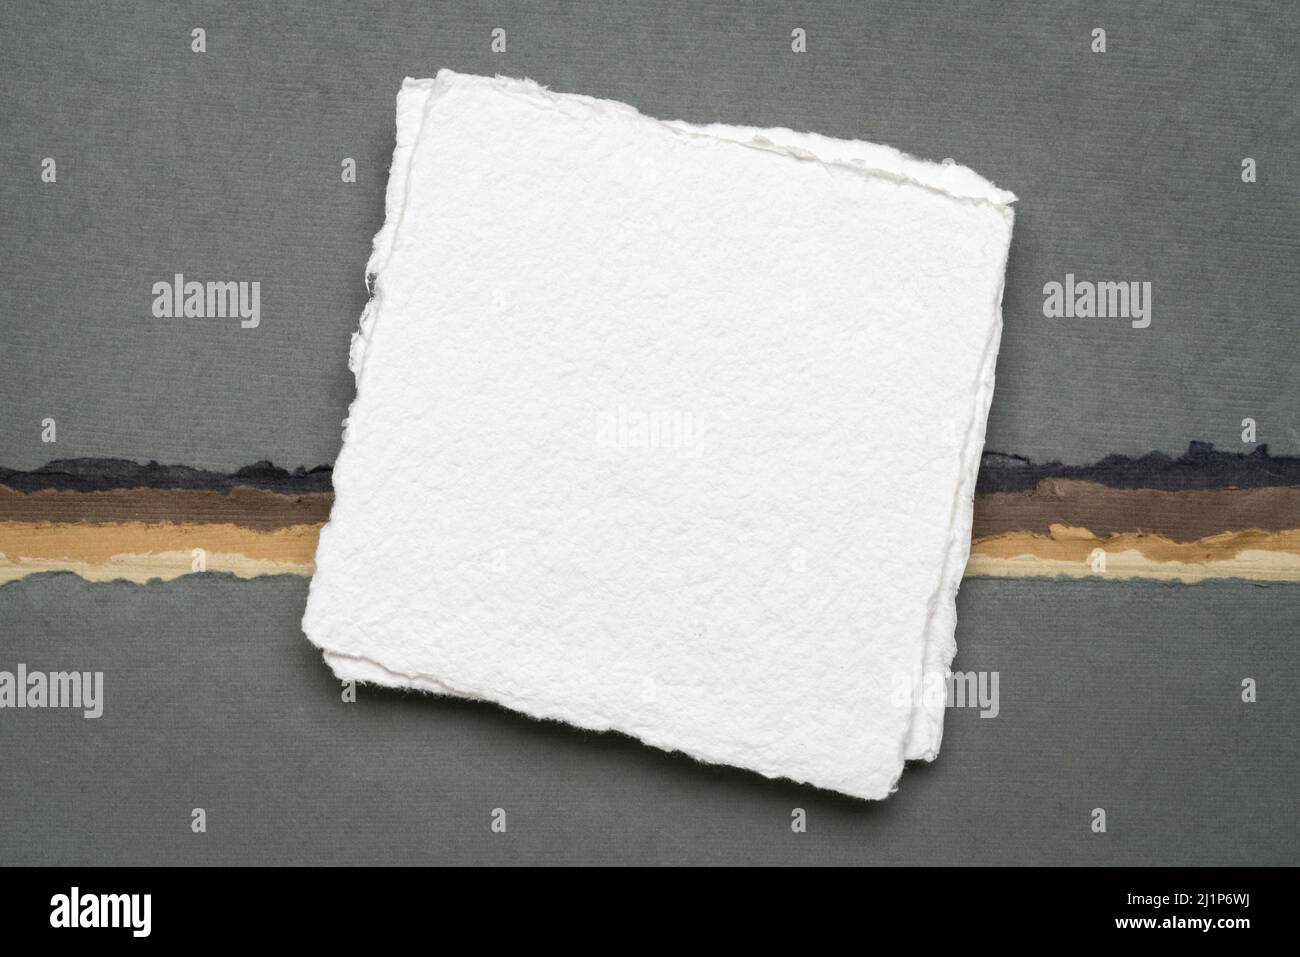 small square sheet of blank white Khadi paper against abstract paper landscape in earth colors Stock Photo